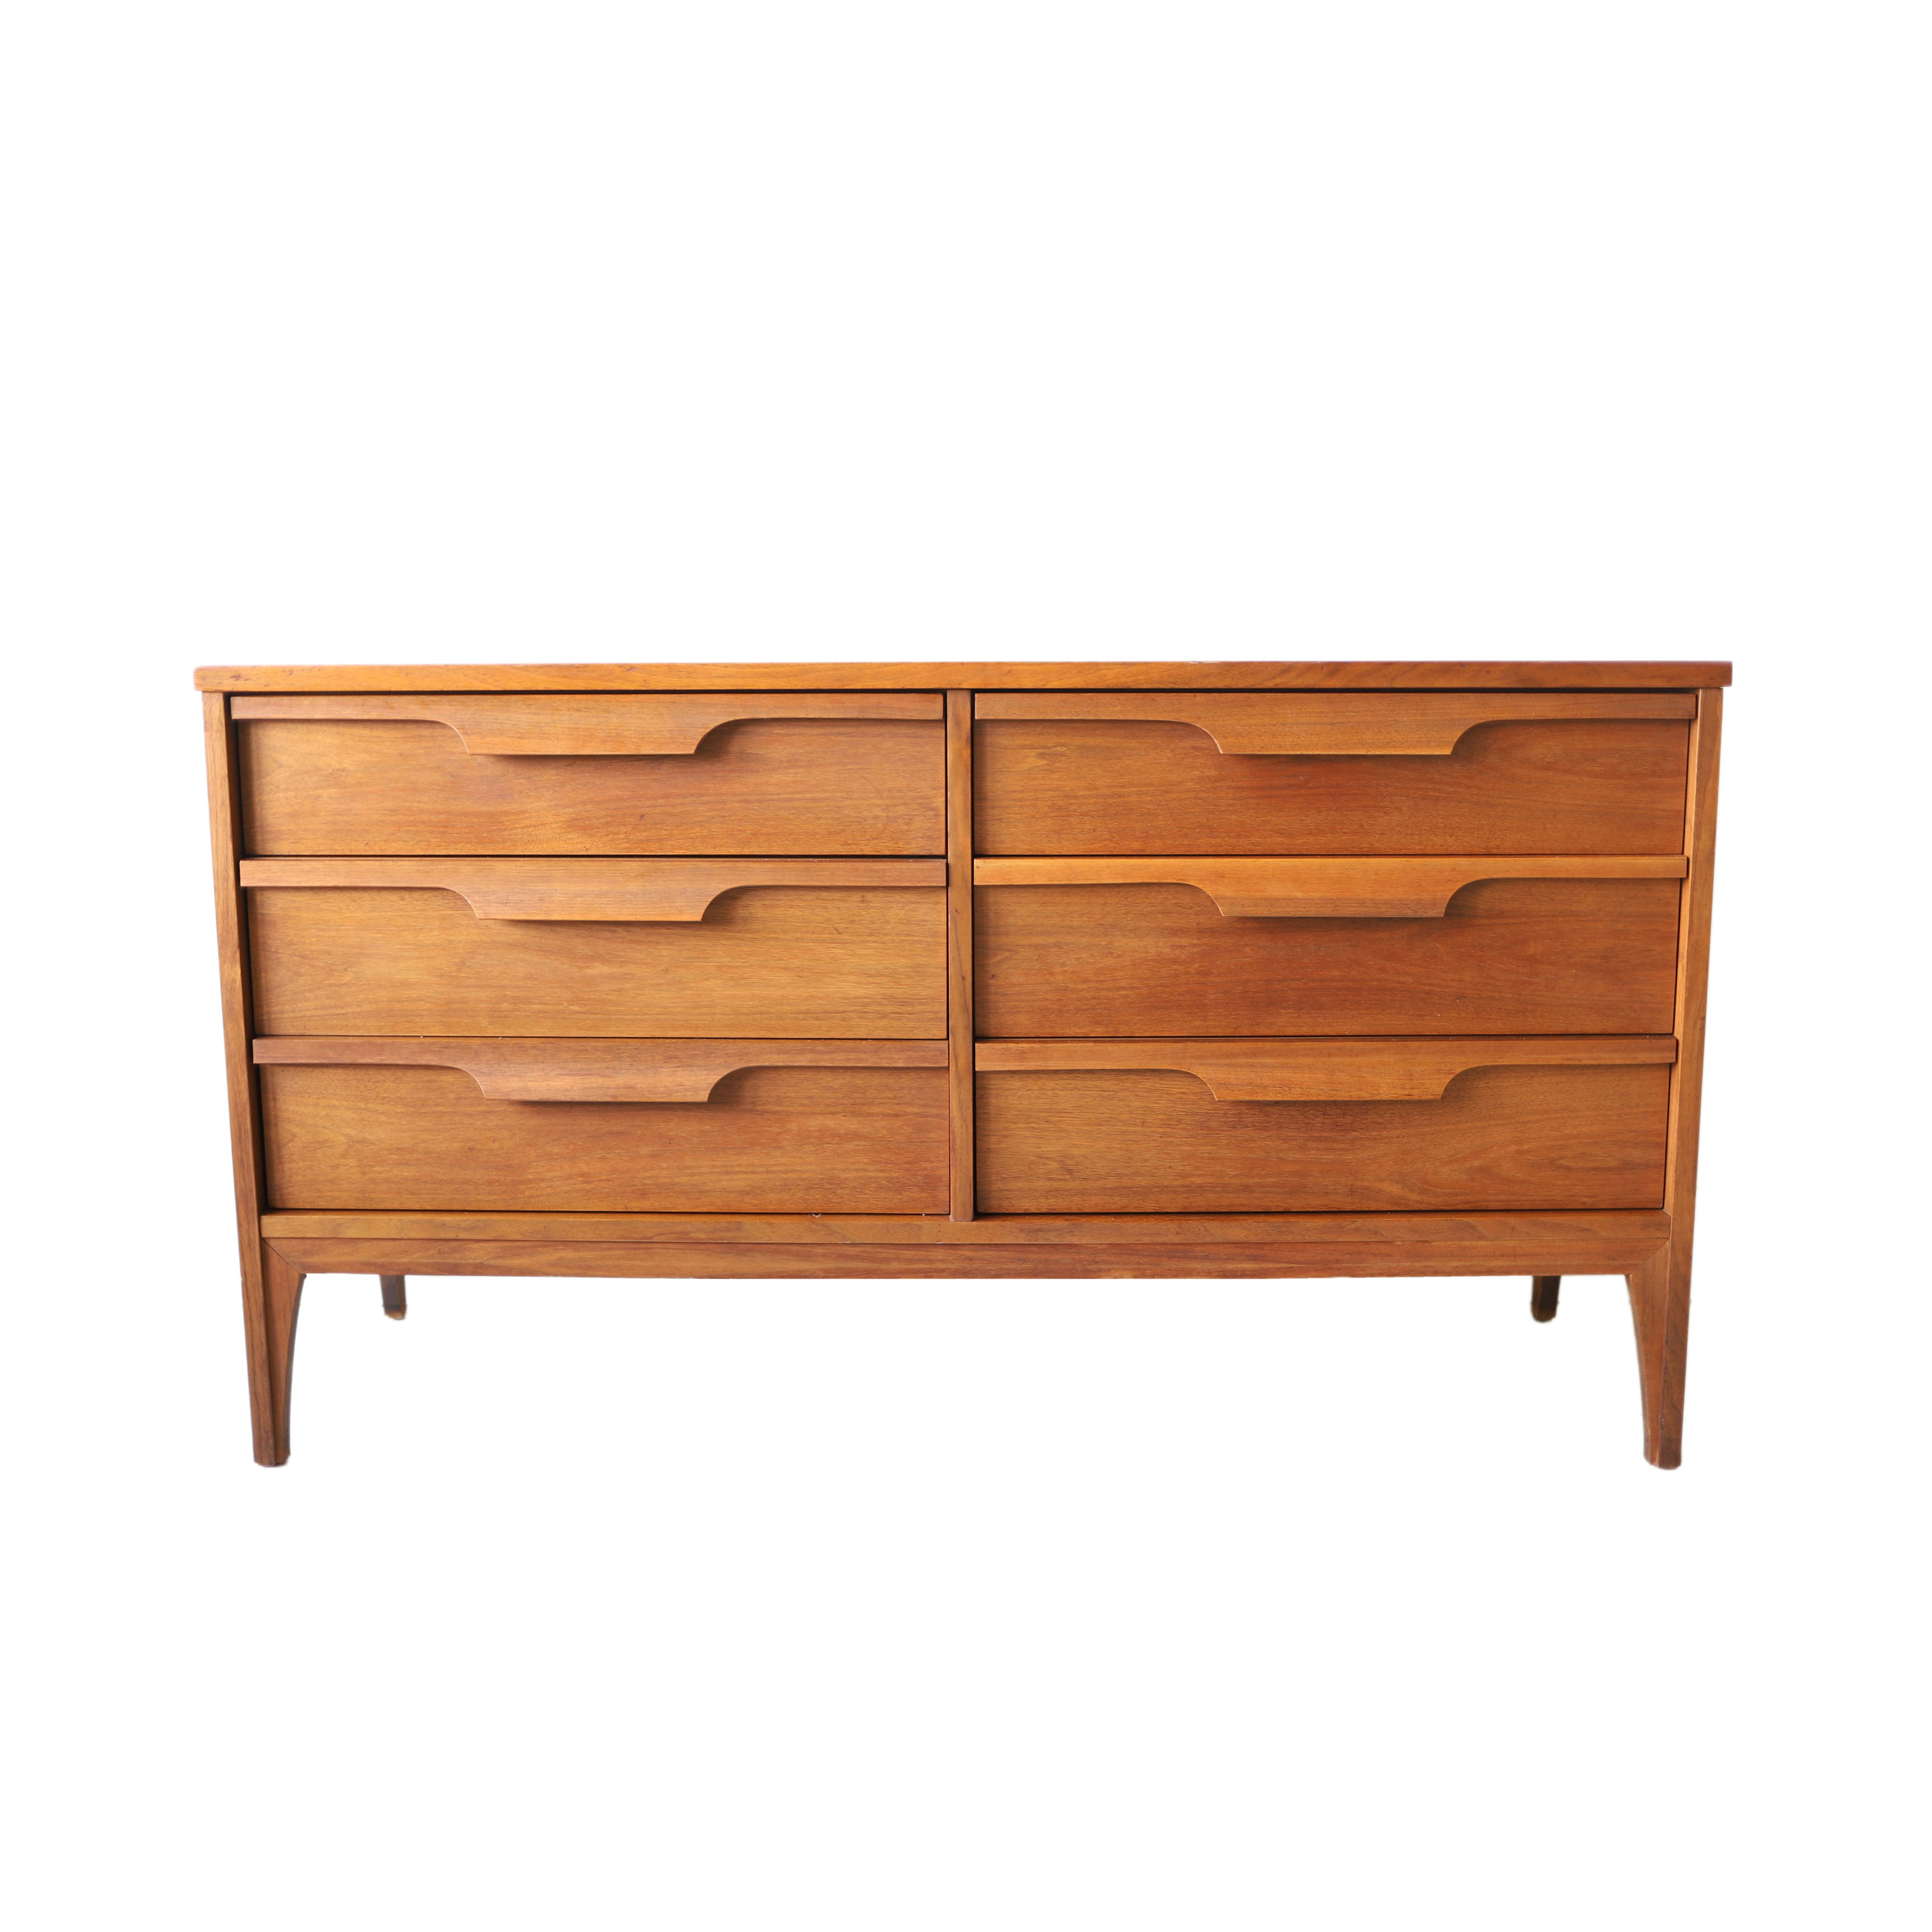 At 1st Sight Products Long Vintage Mid Century Modern Dresser